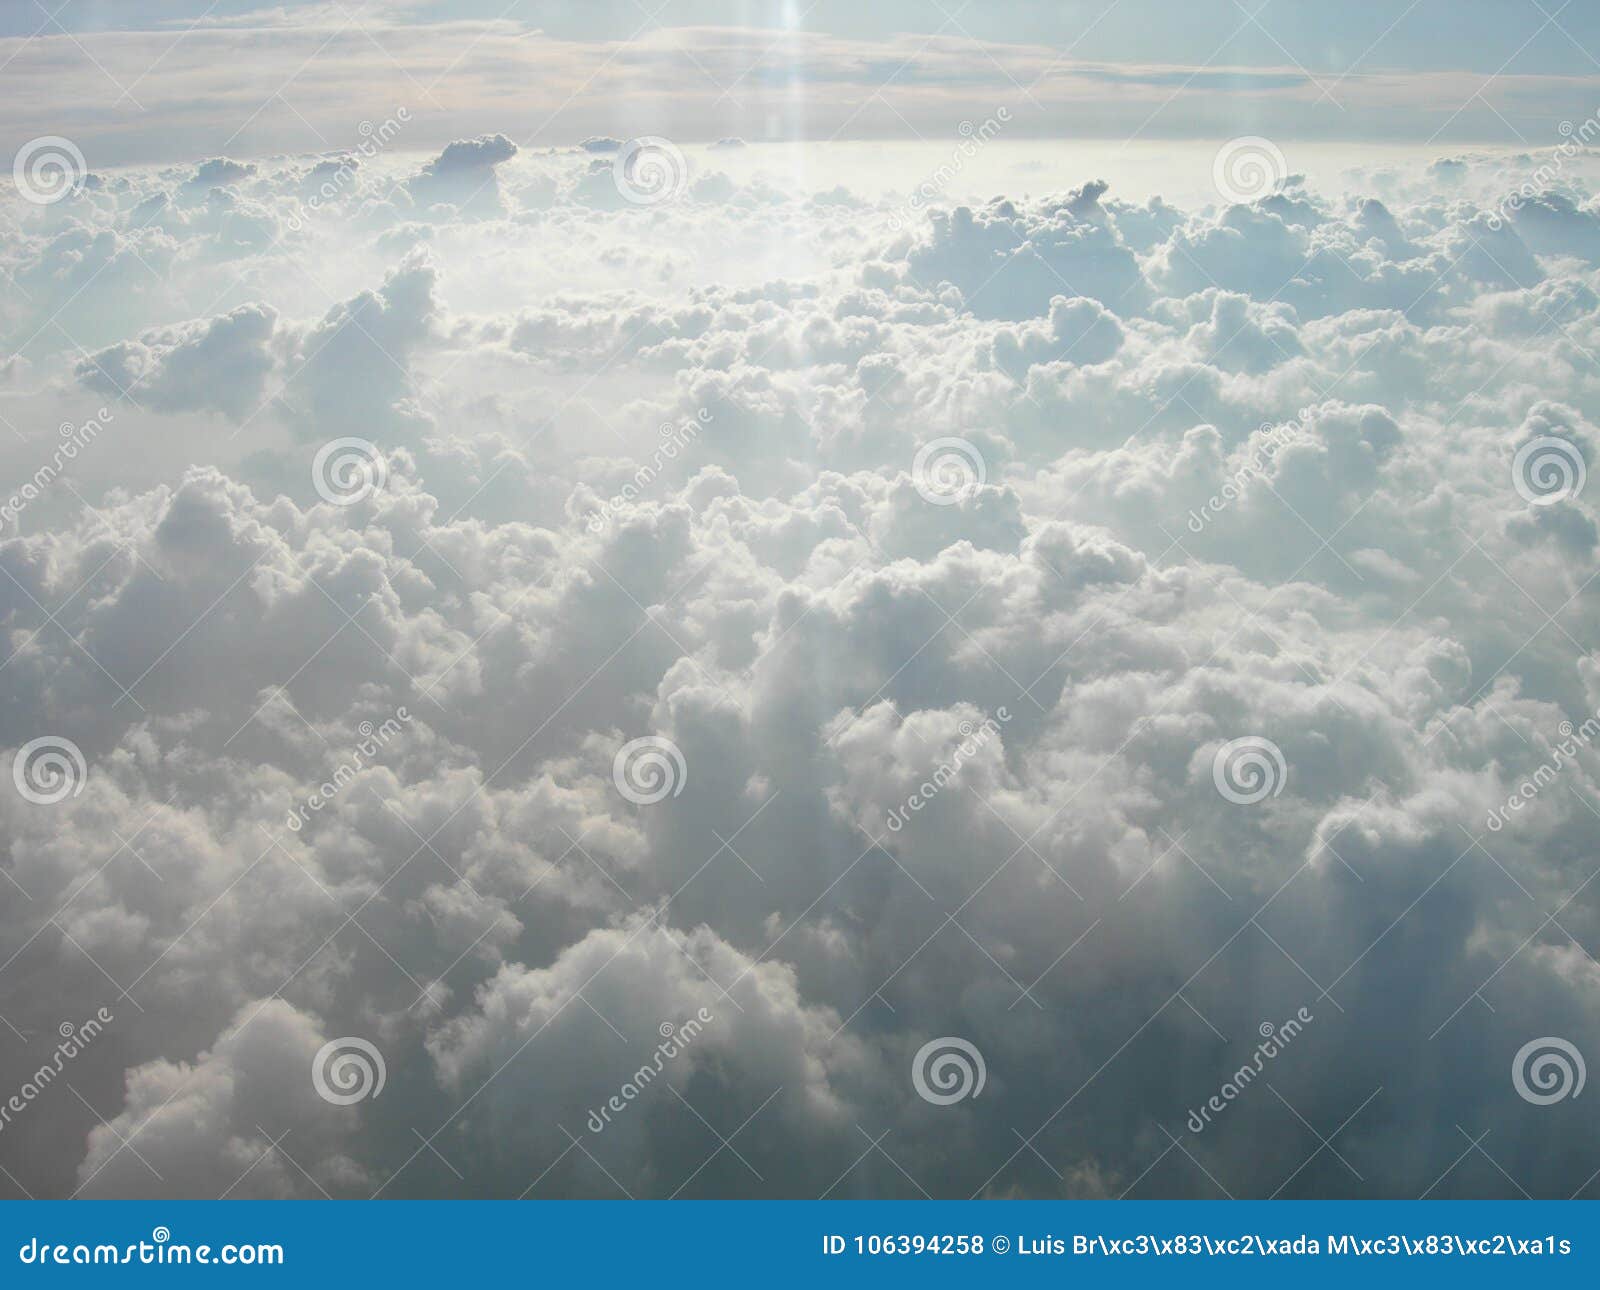 travelling trough fields of white clouds in the sky. light ray in the sky. rayo de luz sobre las nubes